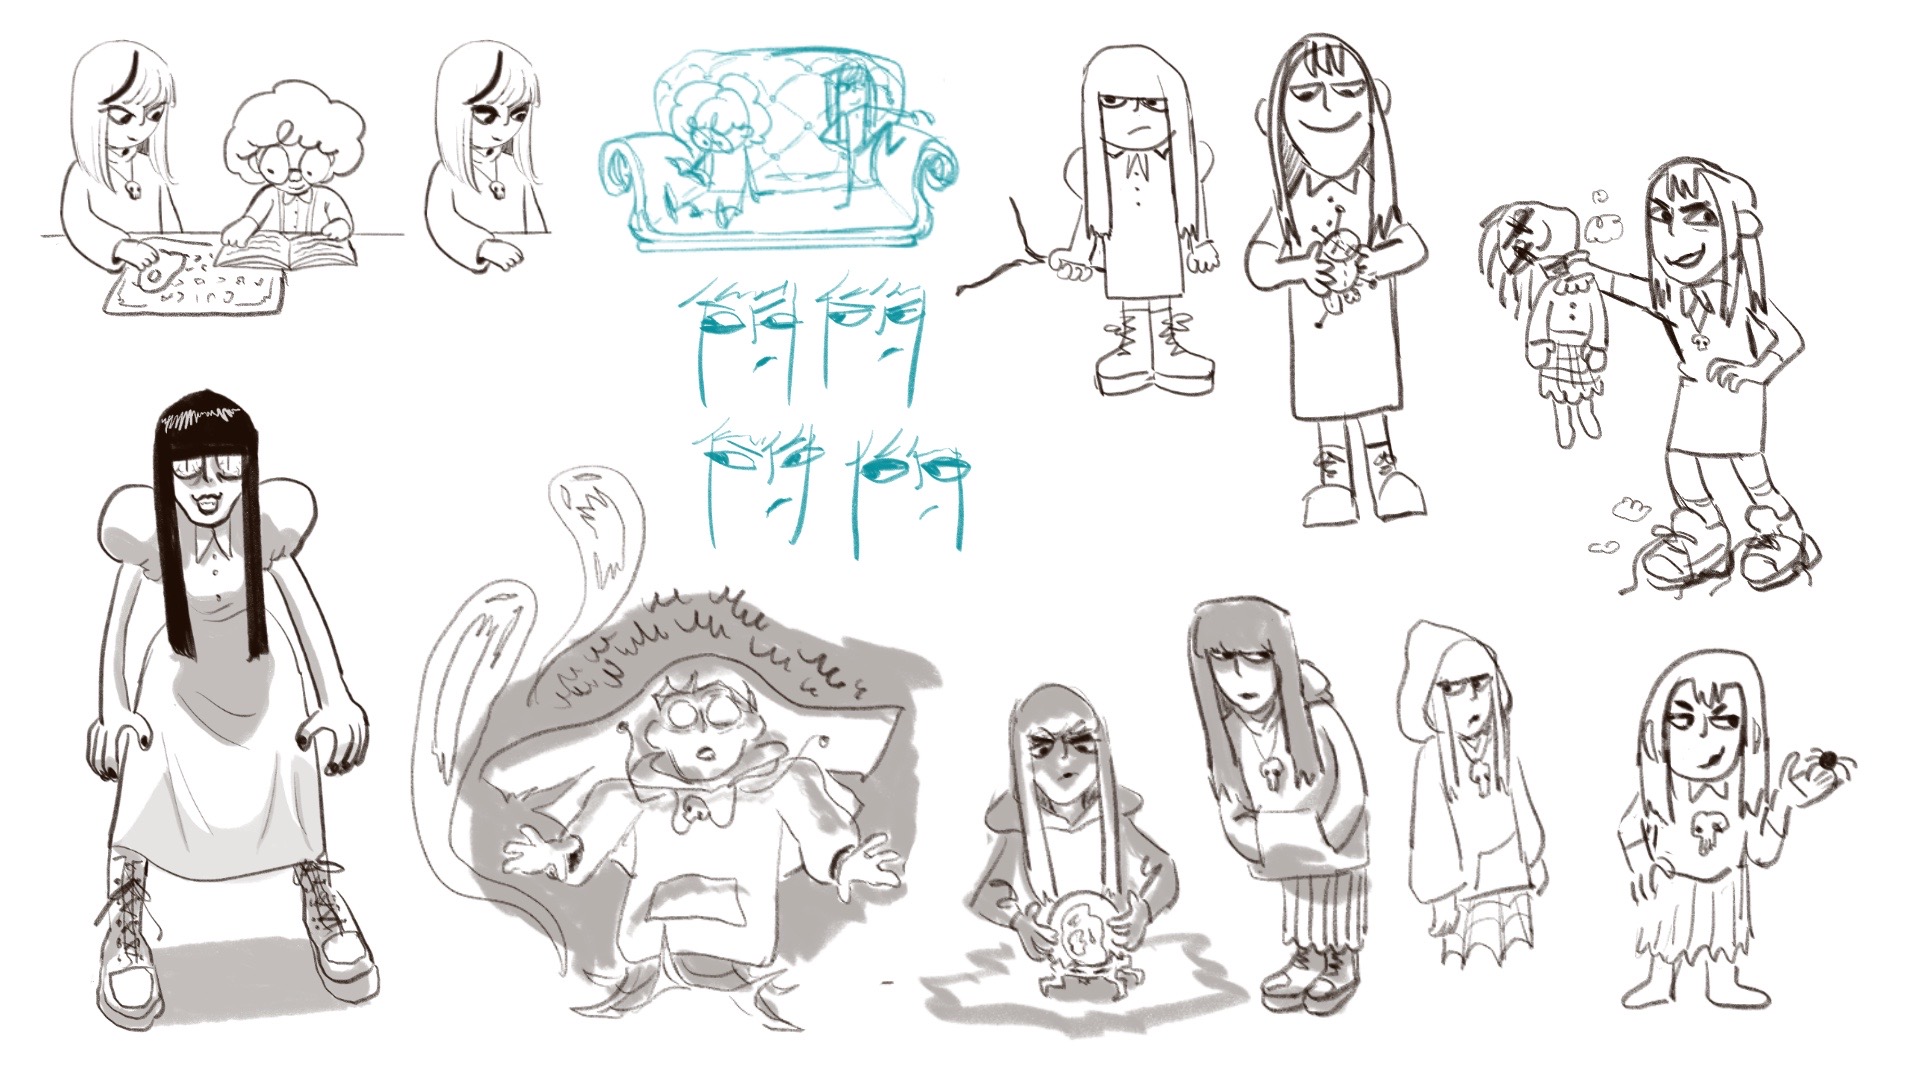 Sketches for the character Ena, a young girl with pale skin and long, straight hair, thick bangs, a large hoodie, spider web patterned skirt, and chunky boots.